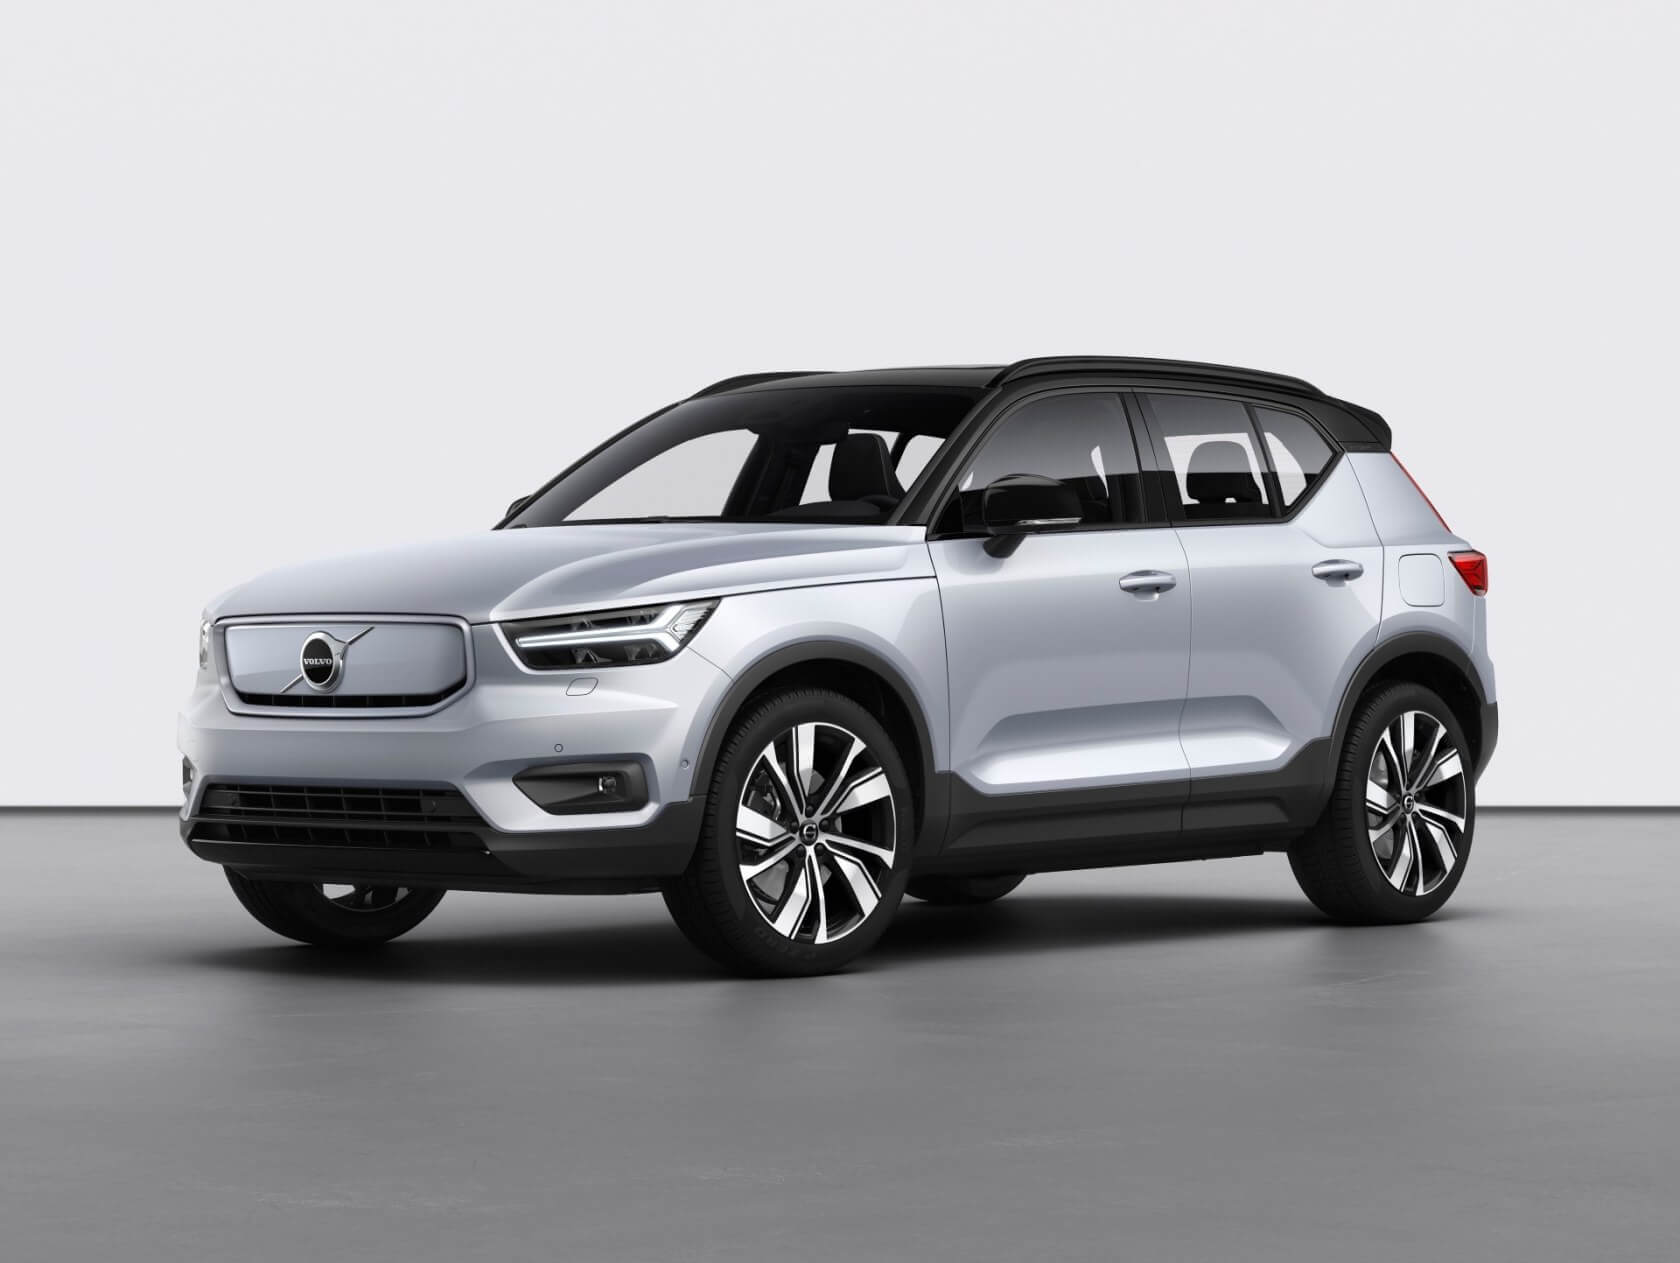 Volvo reveals its first fully-electric SUV, says every new car model will be 'electrified'